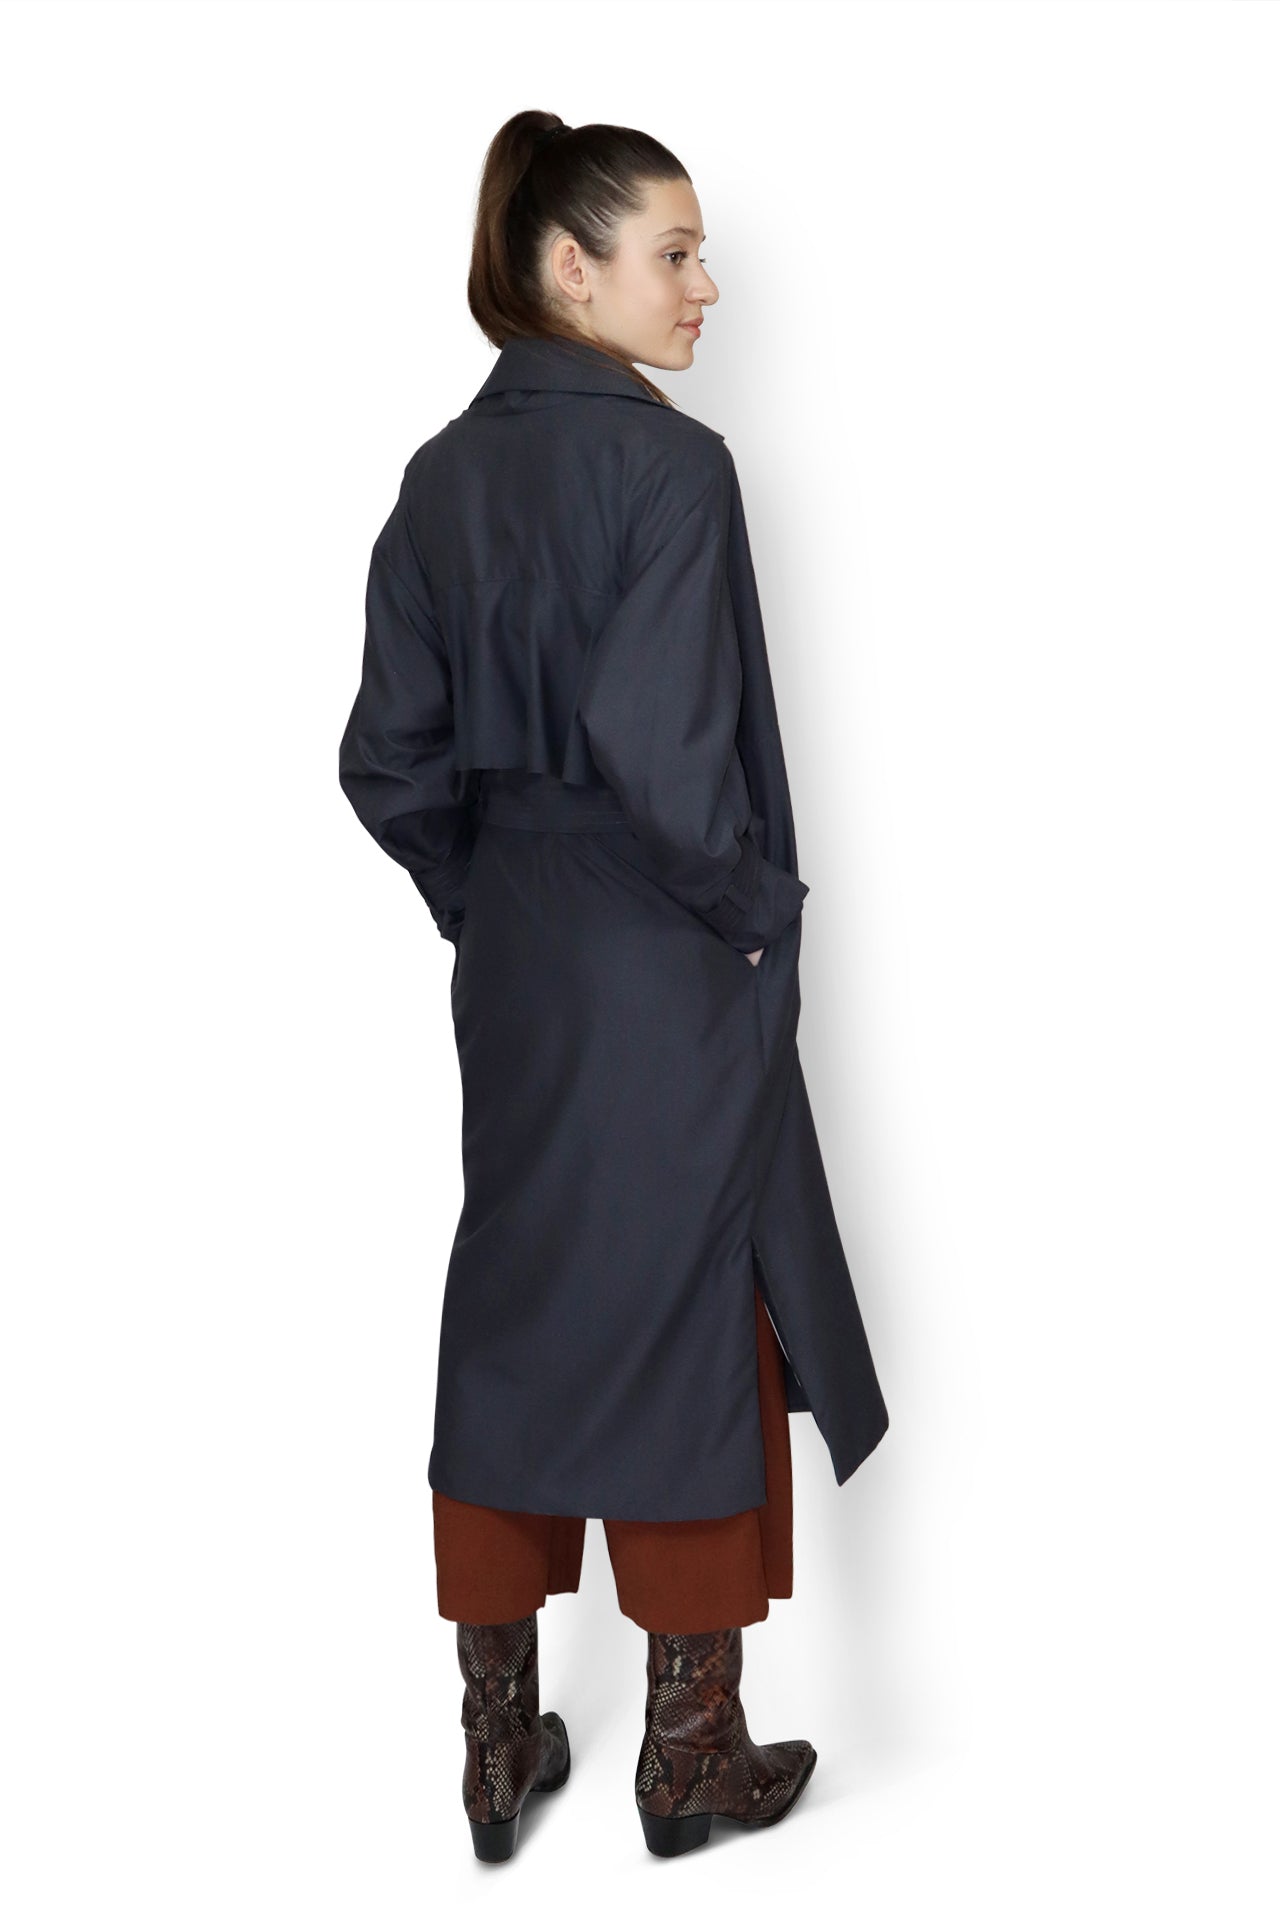 Trench Coat - Navy by Zgest